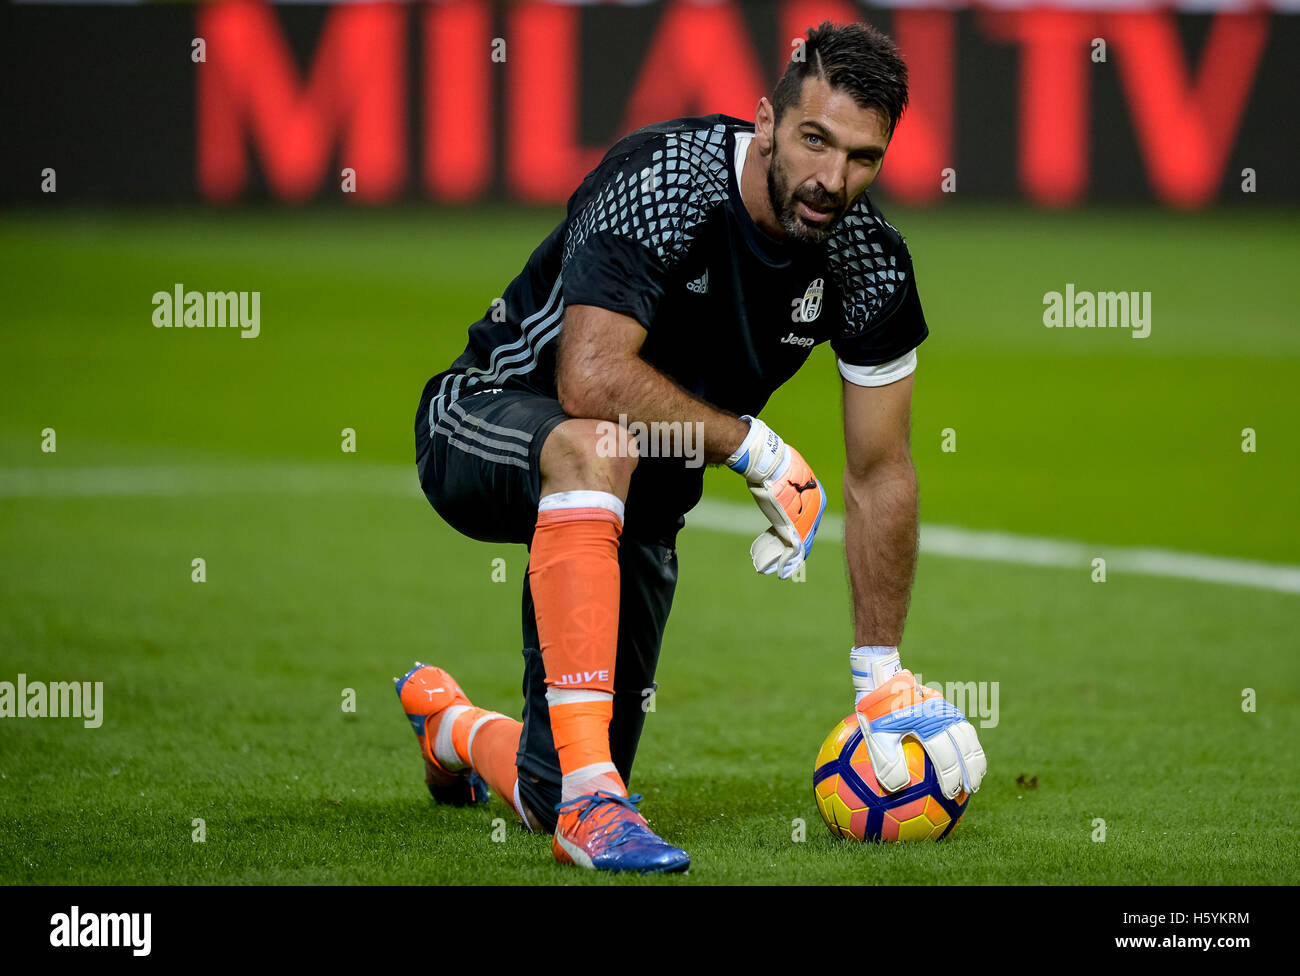 Giuseppe Meazza stadium, Milan, Italy. 22nd October, 2016:. Gianluigi Buffon of Juventus FC looks on before the Serie A football match between AC Milan and Juventus FC. Credit:  Nicolò Campo/Alamy Live News Stock Photo